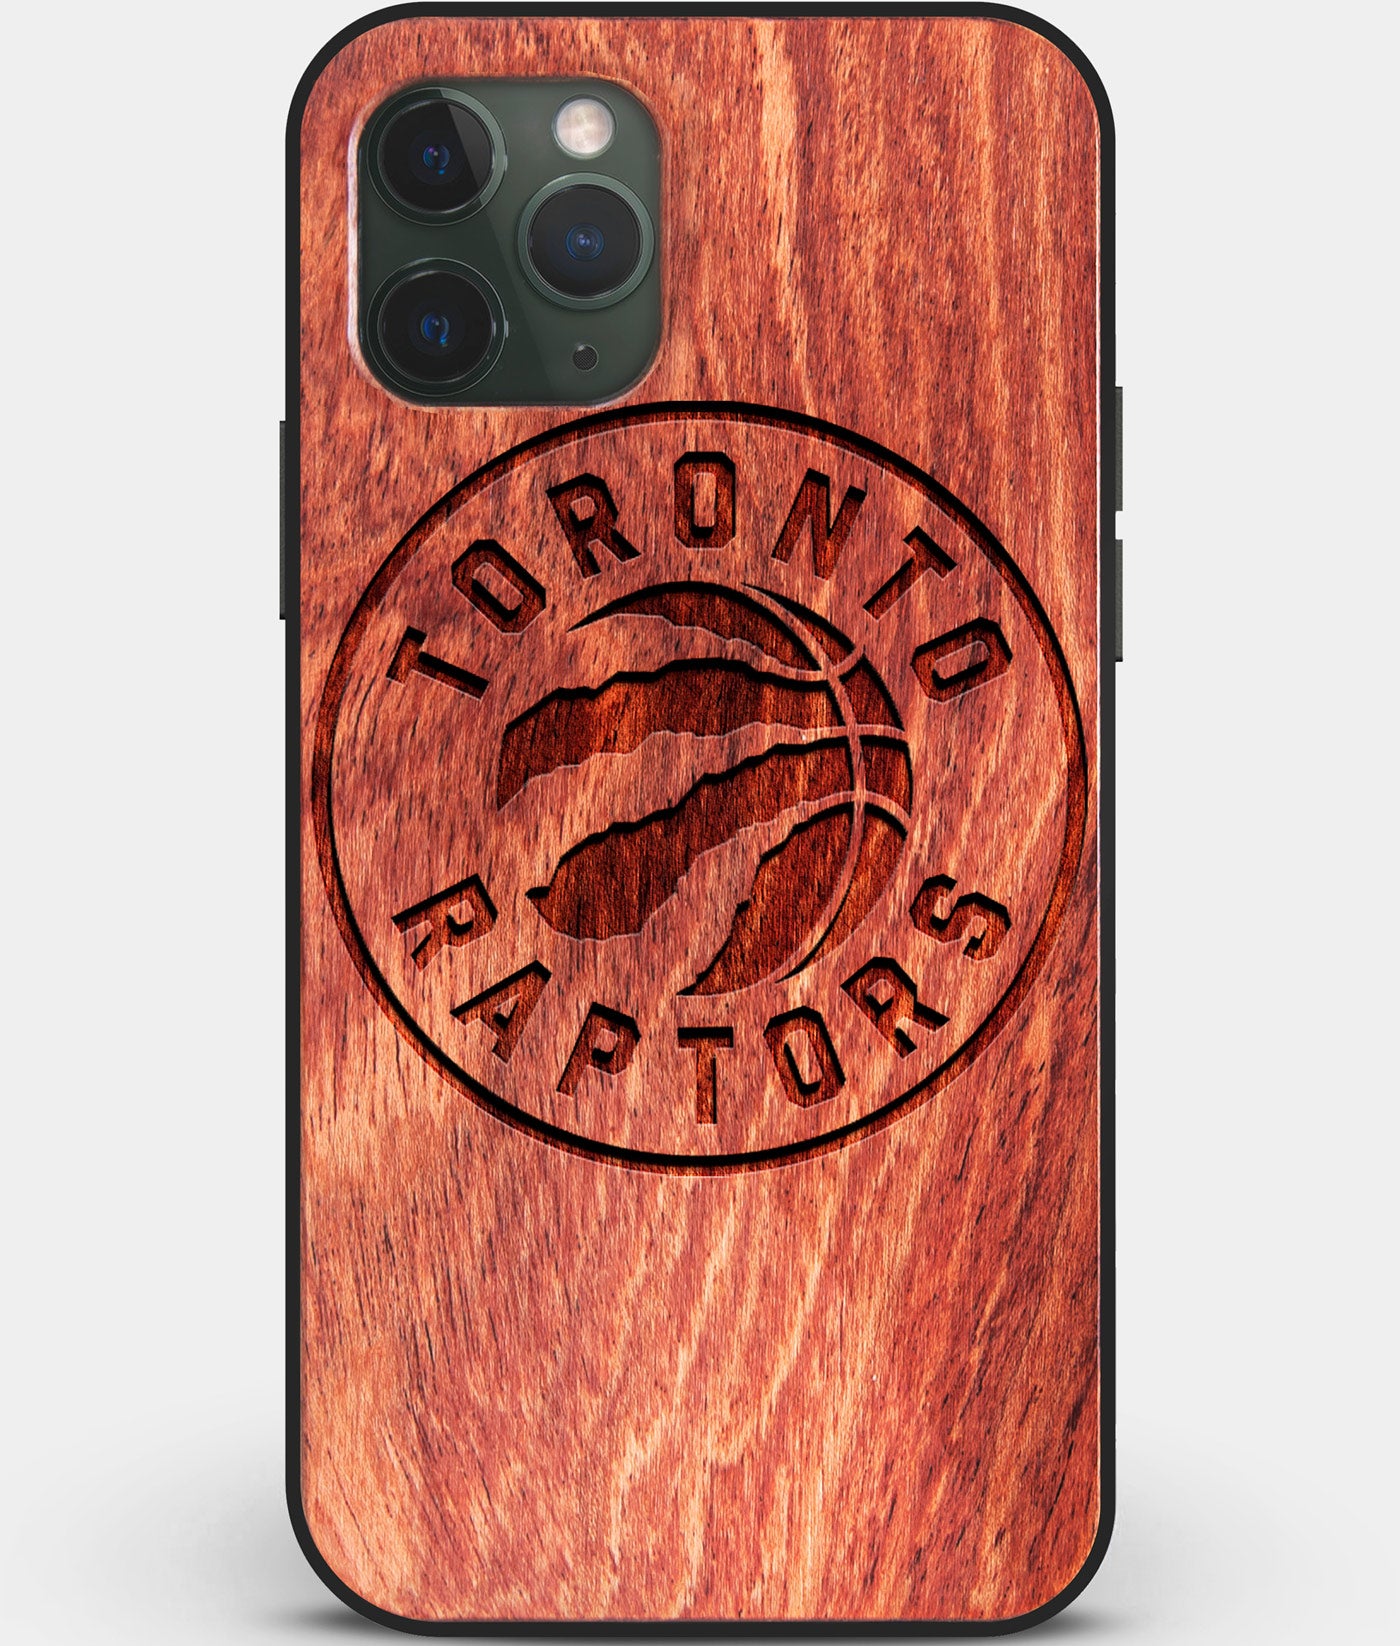 Custom Carved Wood Toronto Raptors iPhone 11 Pro Max Case | Personalized Mahogany Wood Toronto Raptors Cover, Birthday Gift, Gifts For Him, Monogrammed Gift For Fan | by Engraved In Nature